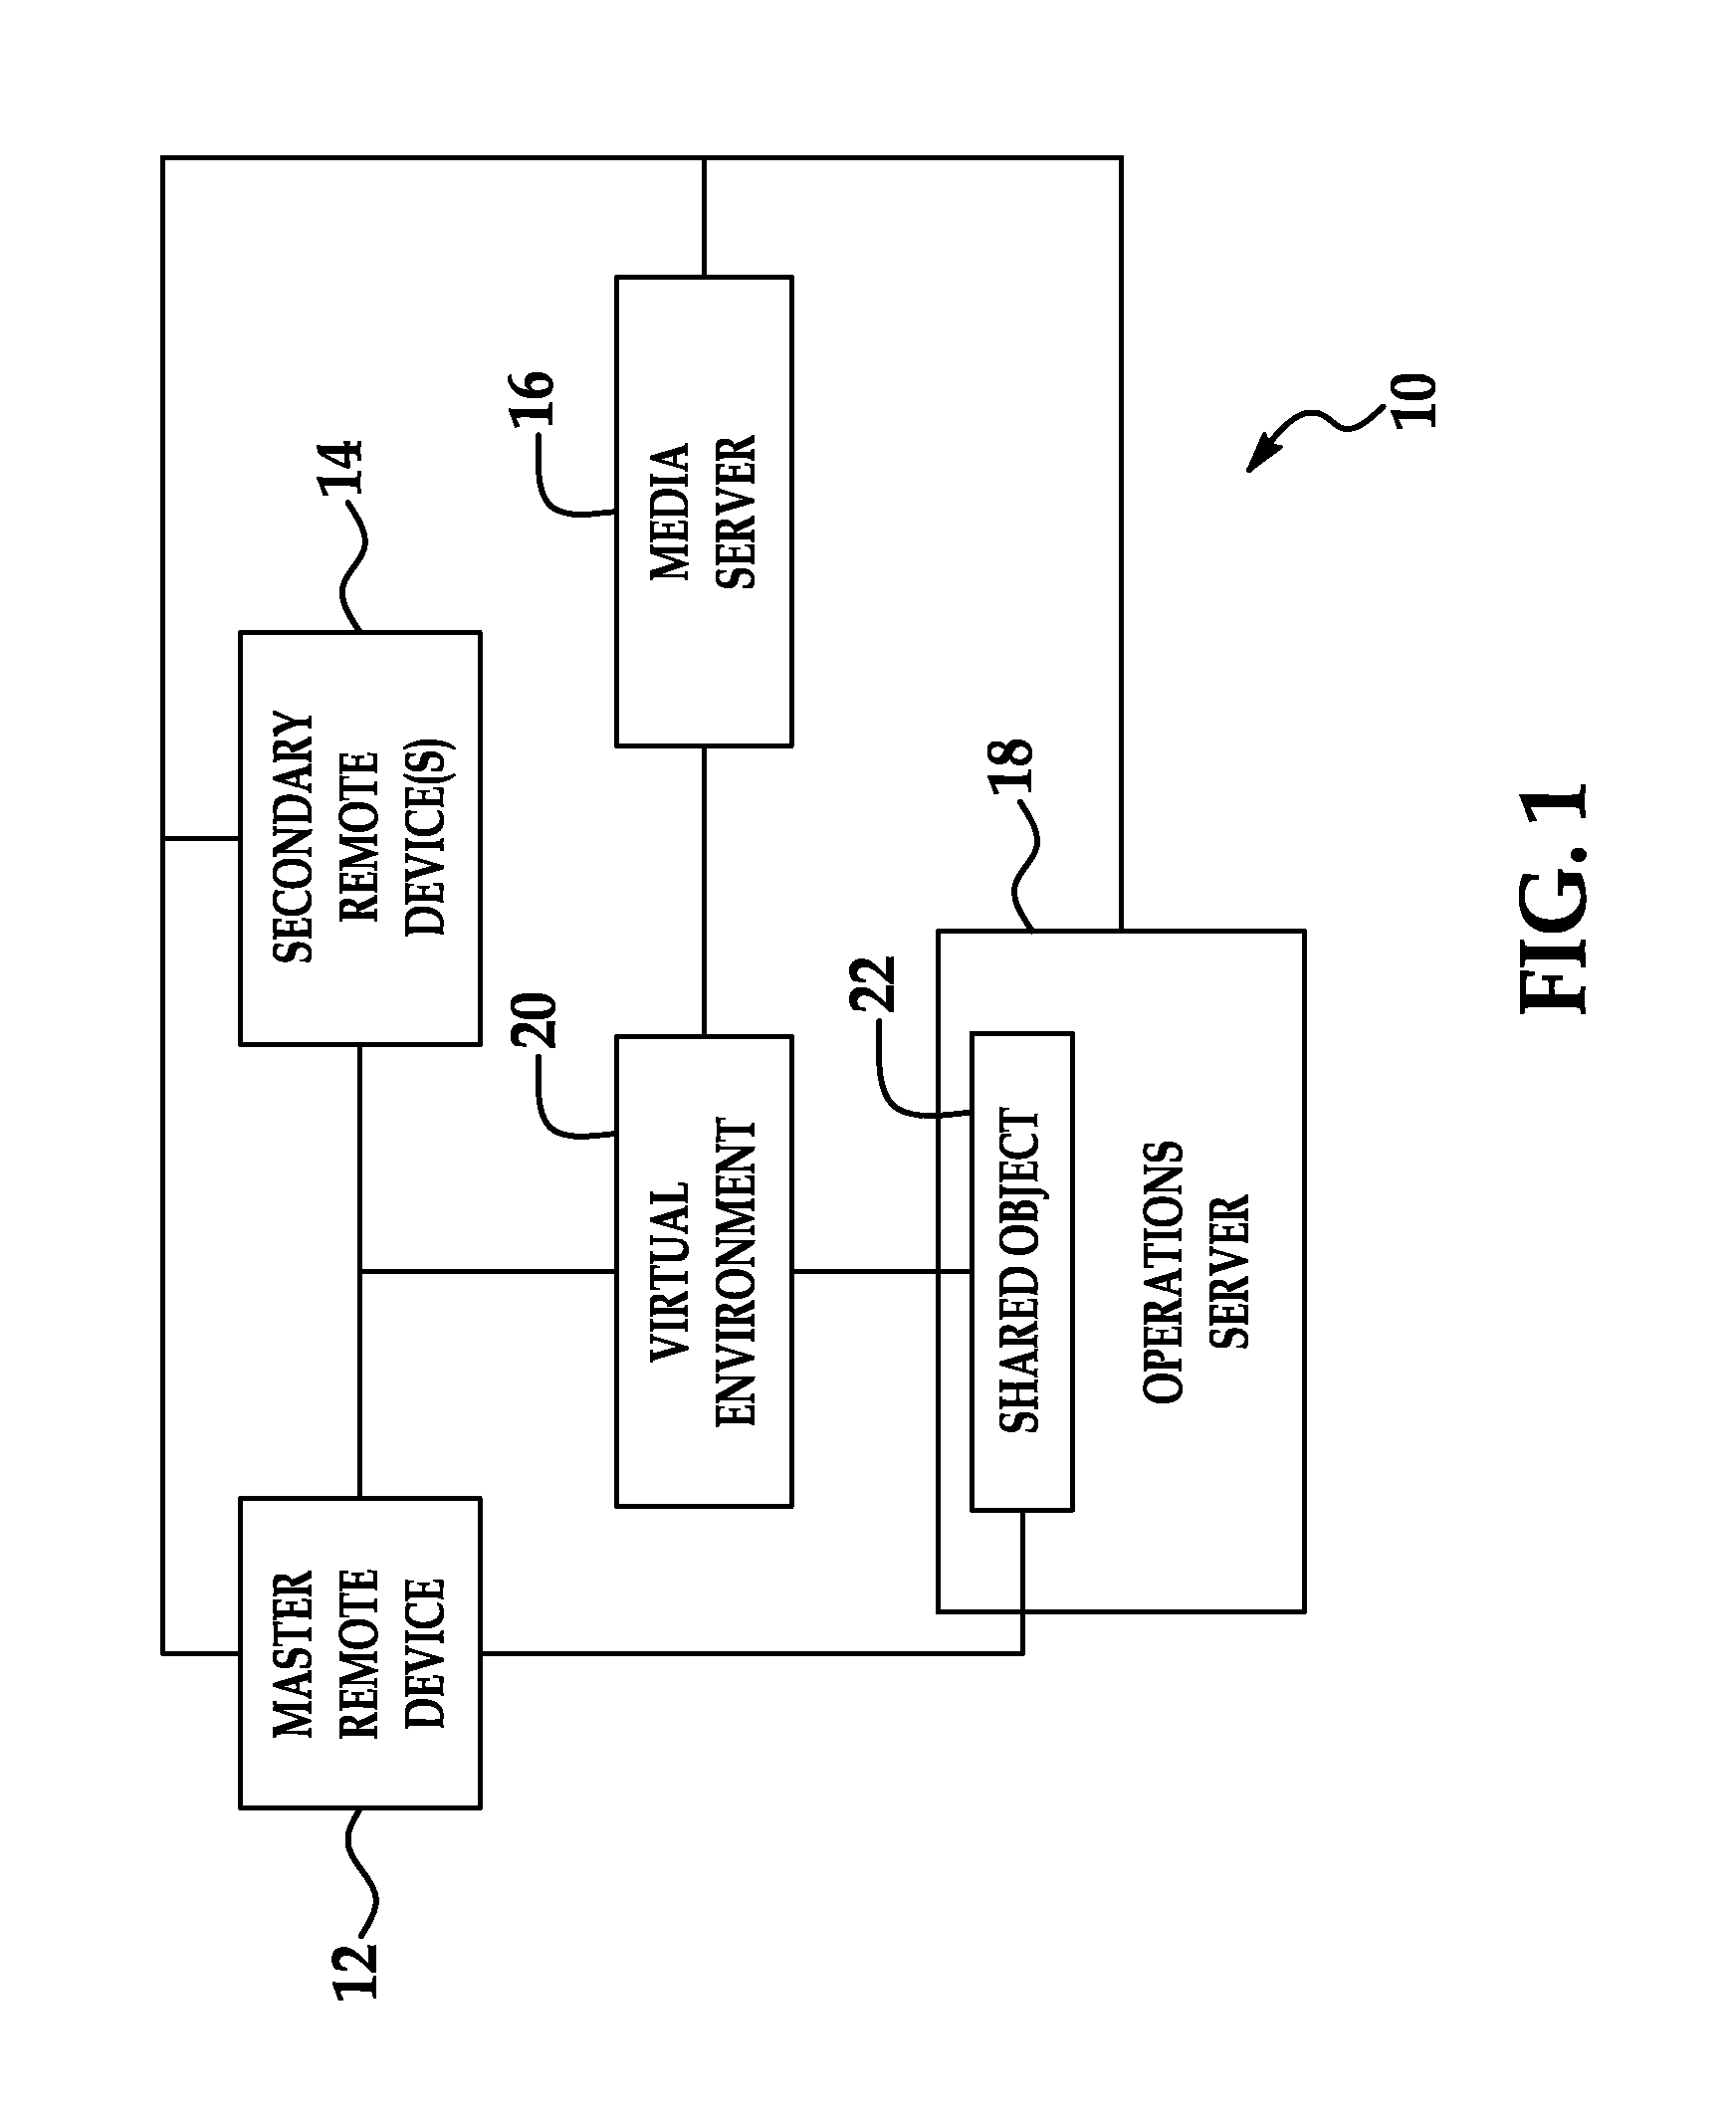 System and Method for Providing a Virtual Environment with Shared Video on Demand